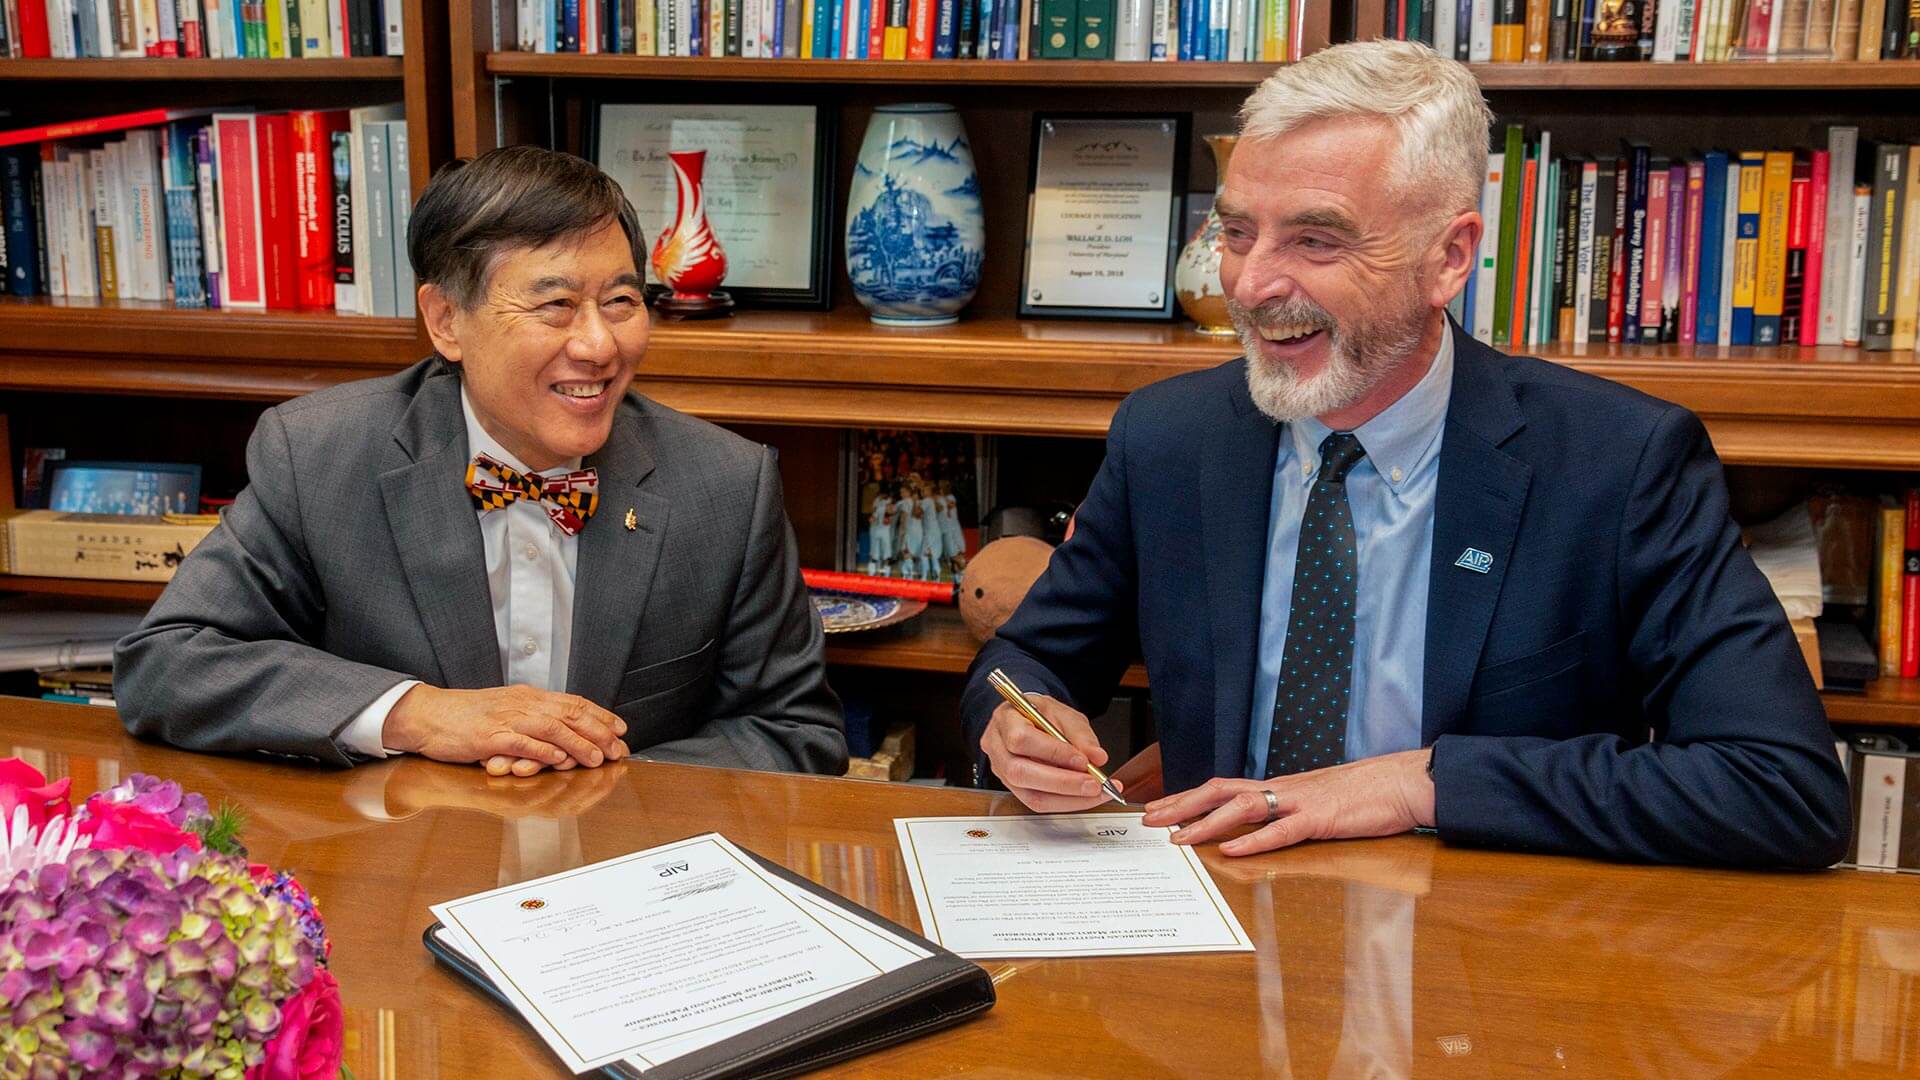 President Wallace D. Loh and Michael H. Moloney, chief executive officer at AIP